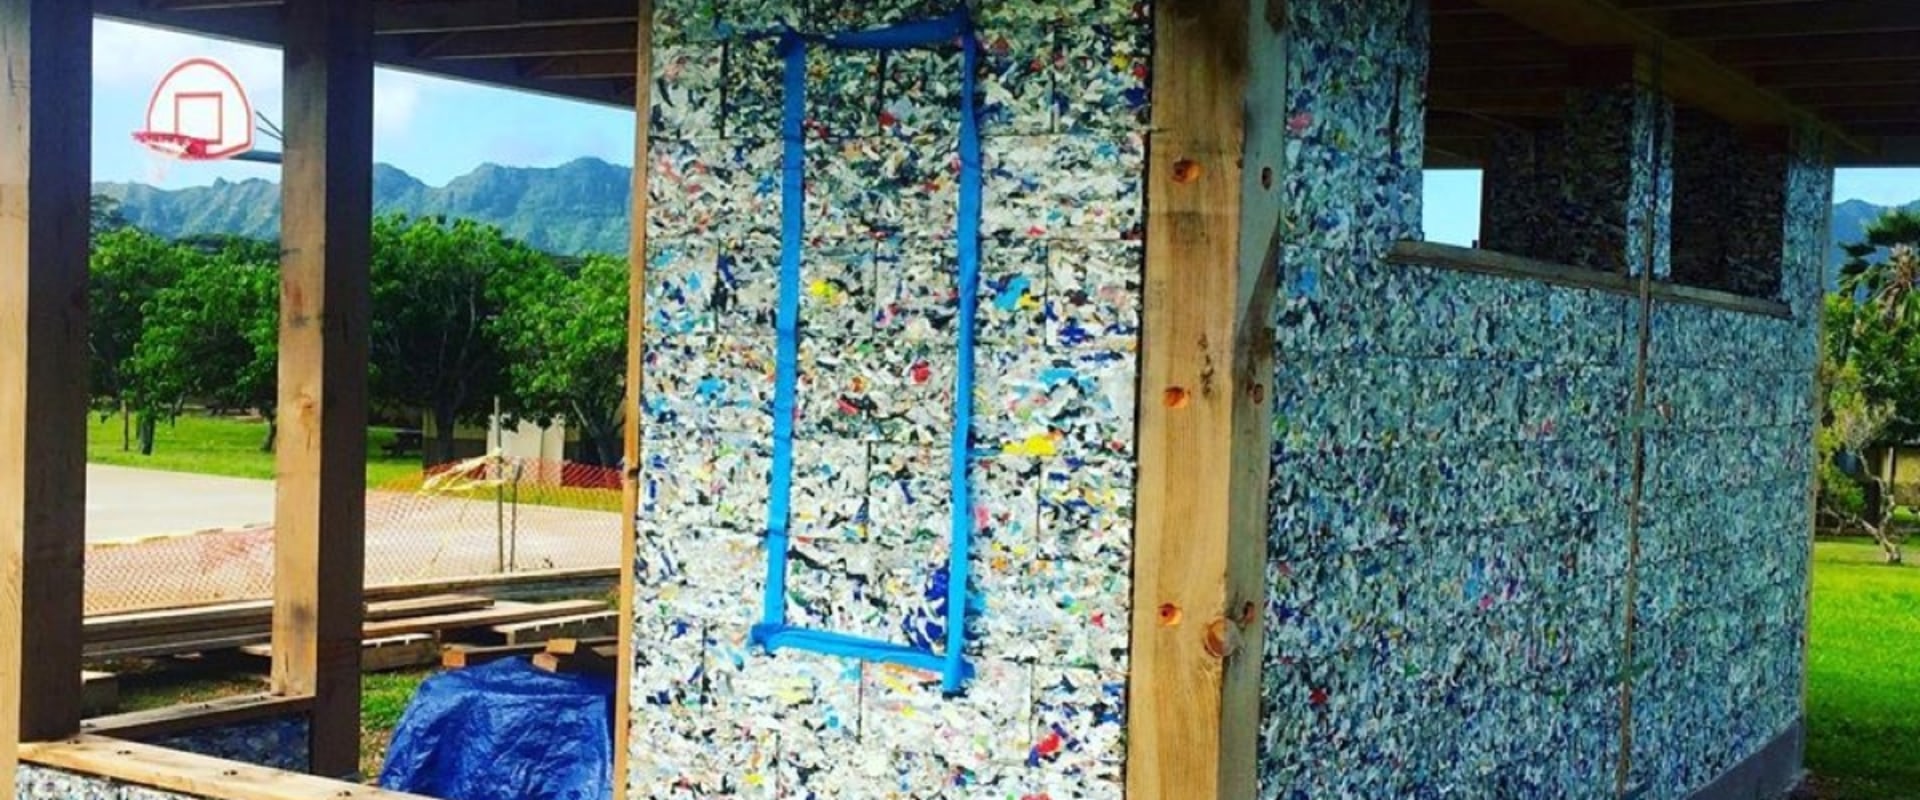 How to Incorporate Recycled and Repurposed Materials in Your Home Construction and Renovation